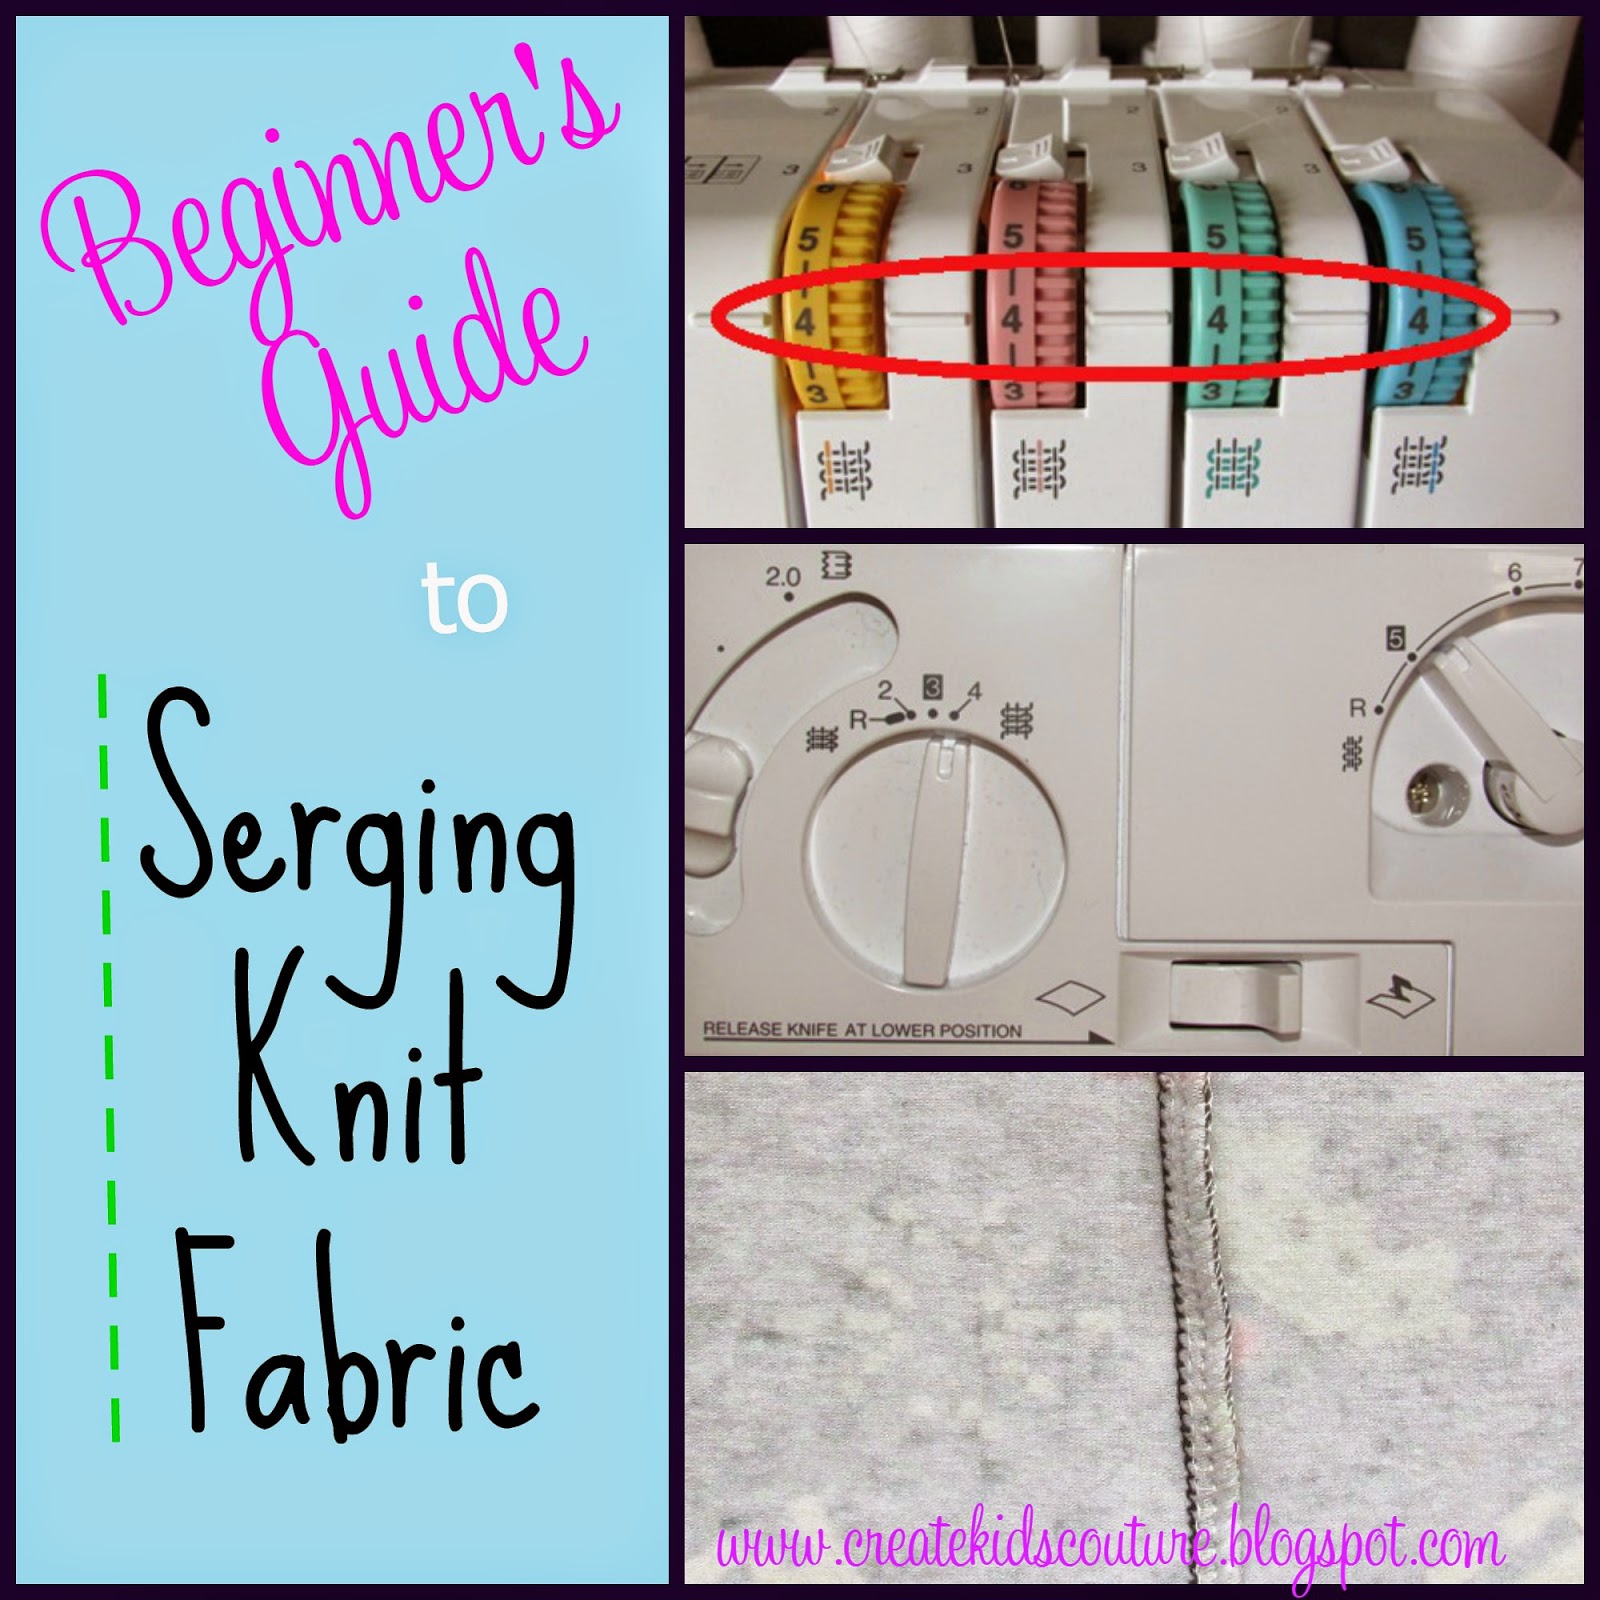 How To Adjust Serger Tension - Troubleshooting for Beginners - Melly Sews